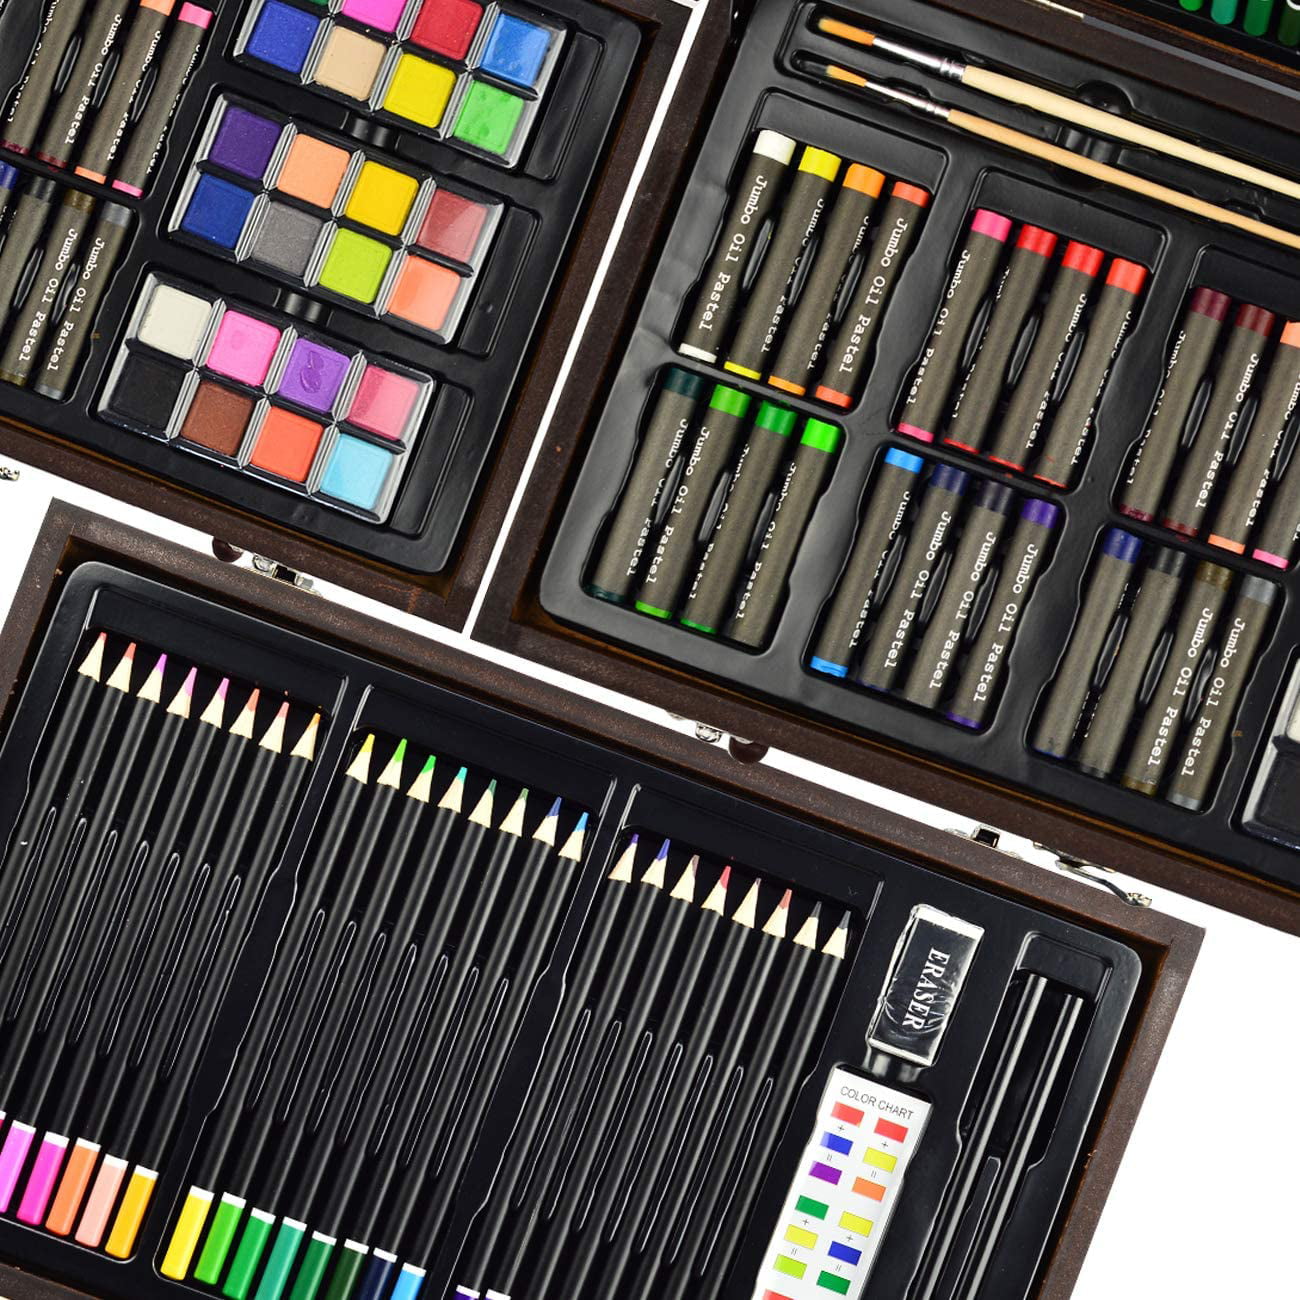 Art Set, 141 Pieces Deluxe Art Set, Wooden Painting Case & Art Supplies Kit  with Crayons, Colored Pencils, Sketch Pencils, Paint Brushes, Sharpener